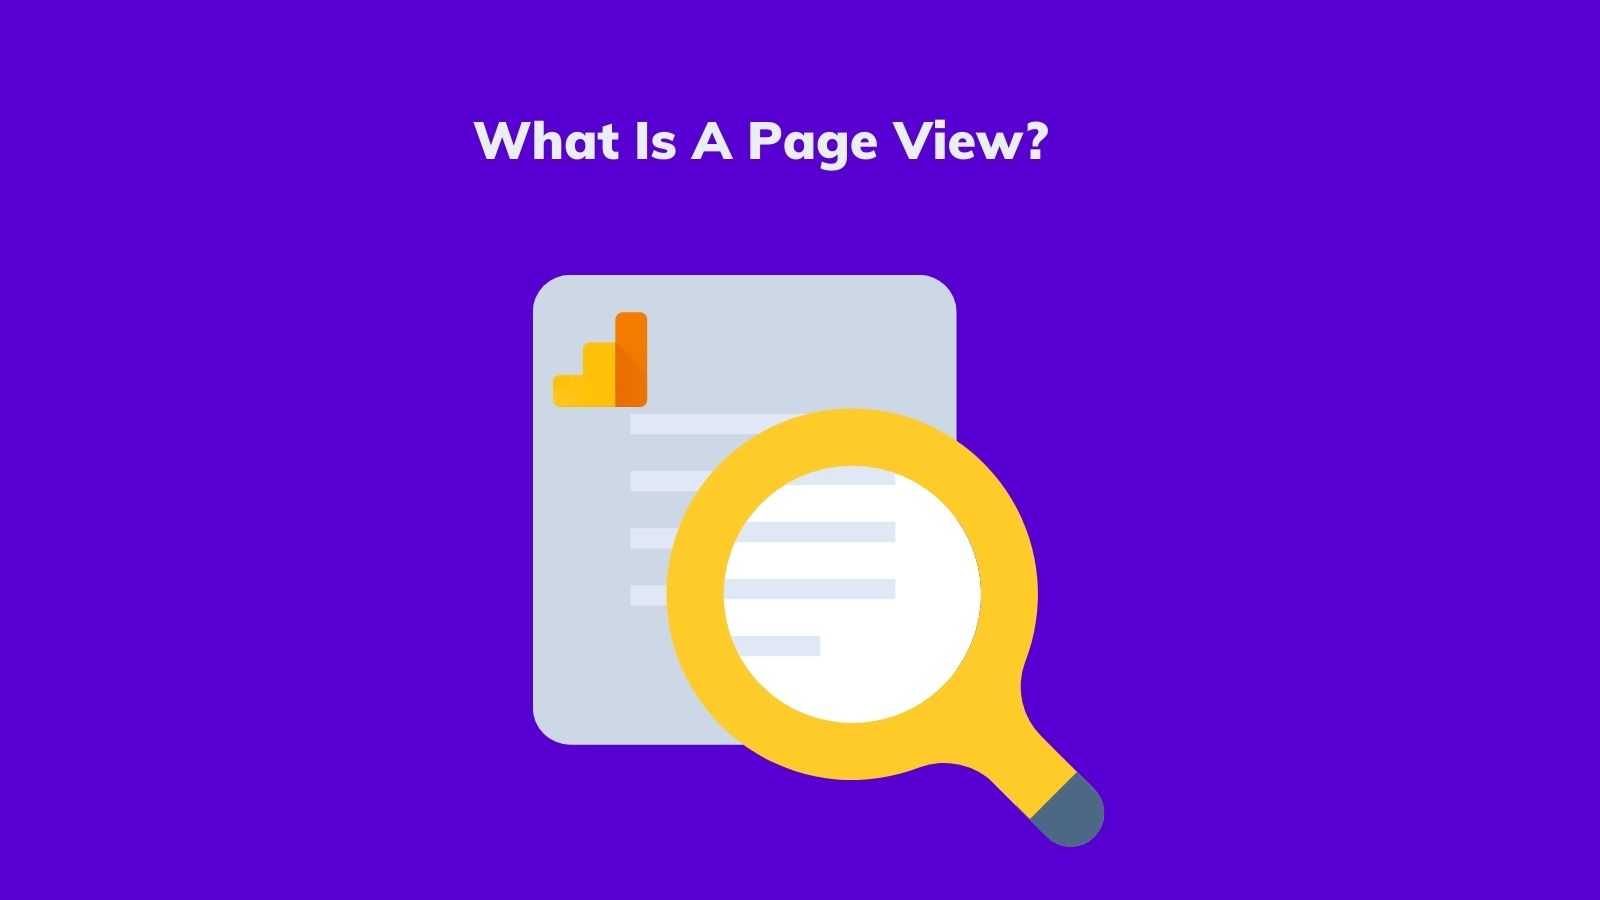 What is a page view on agilitycms.com